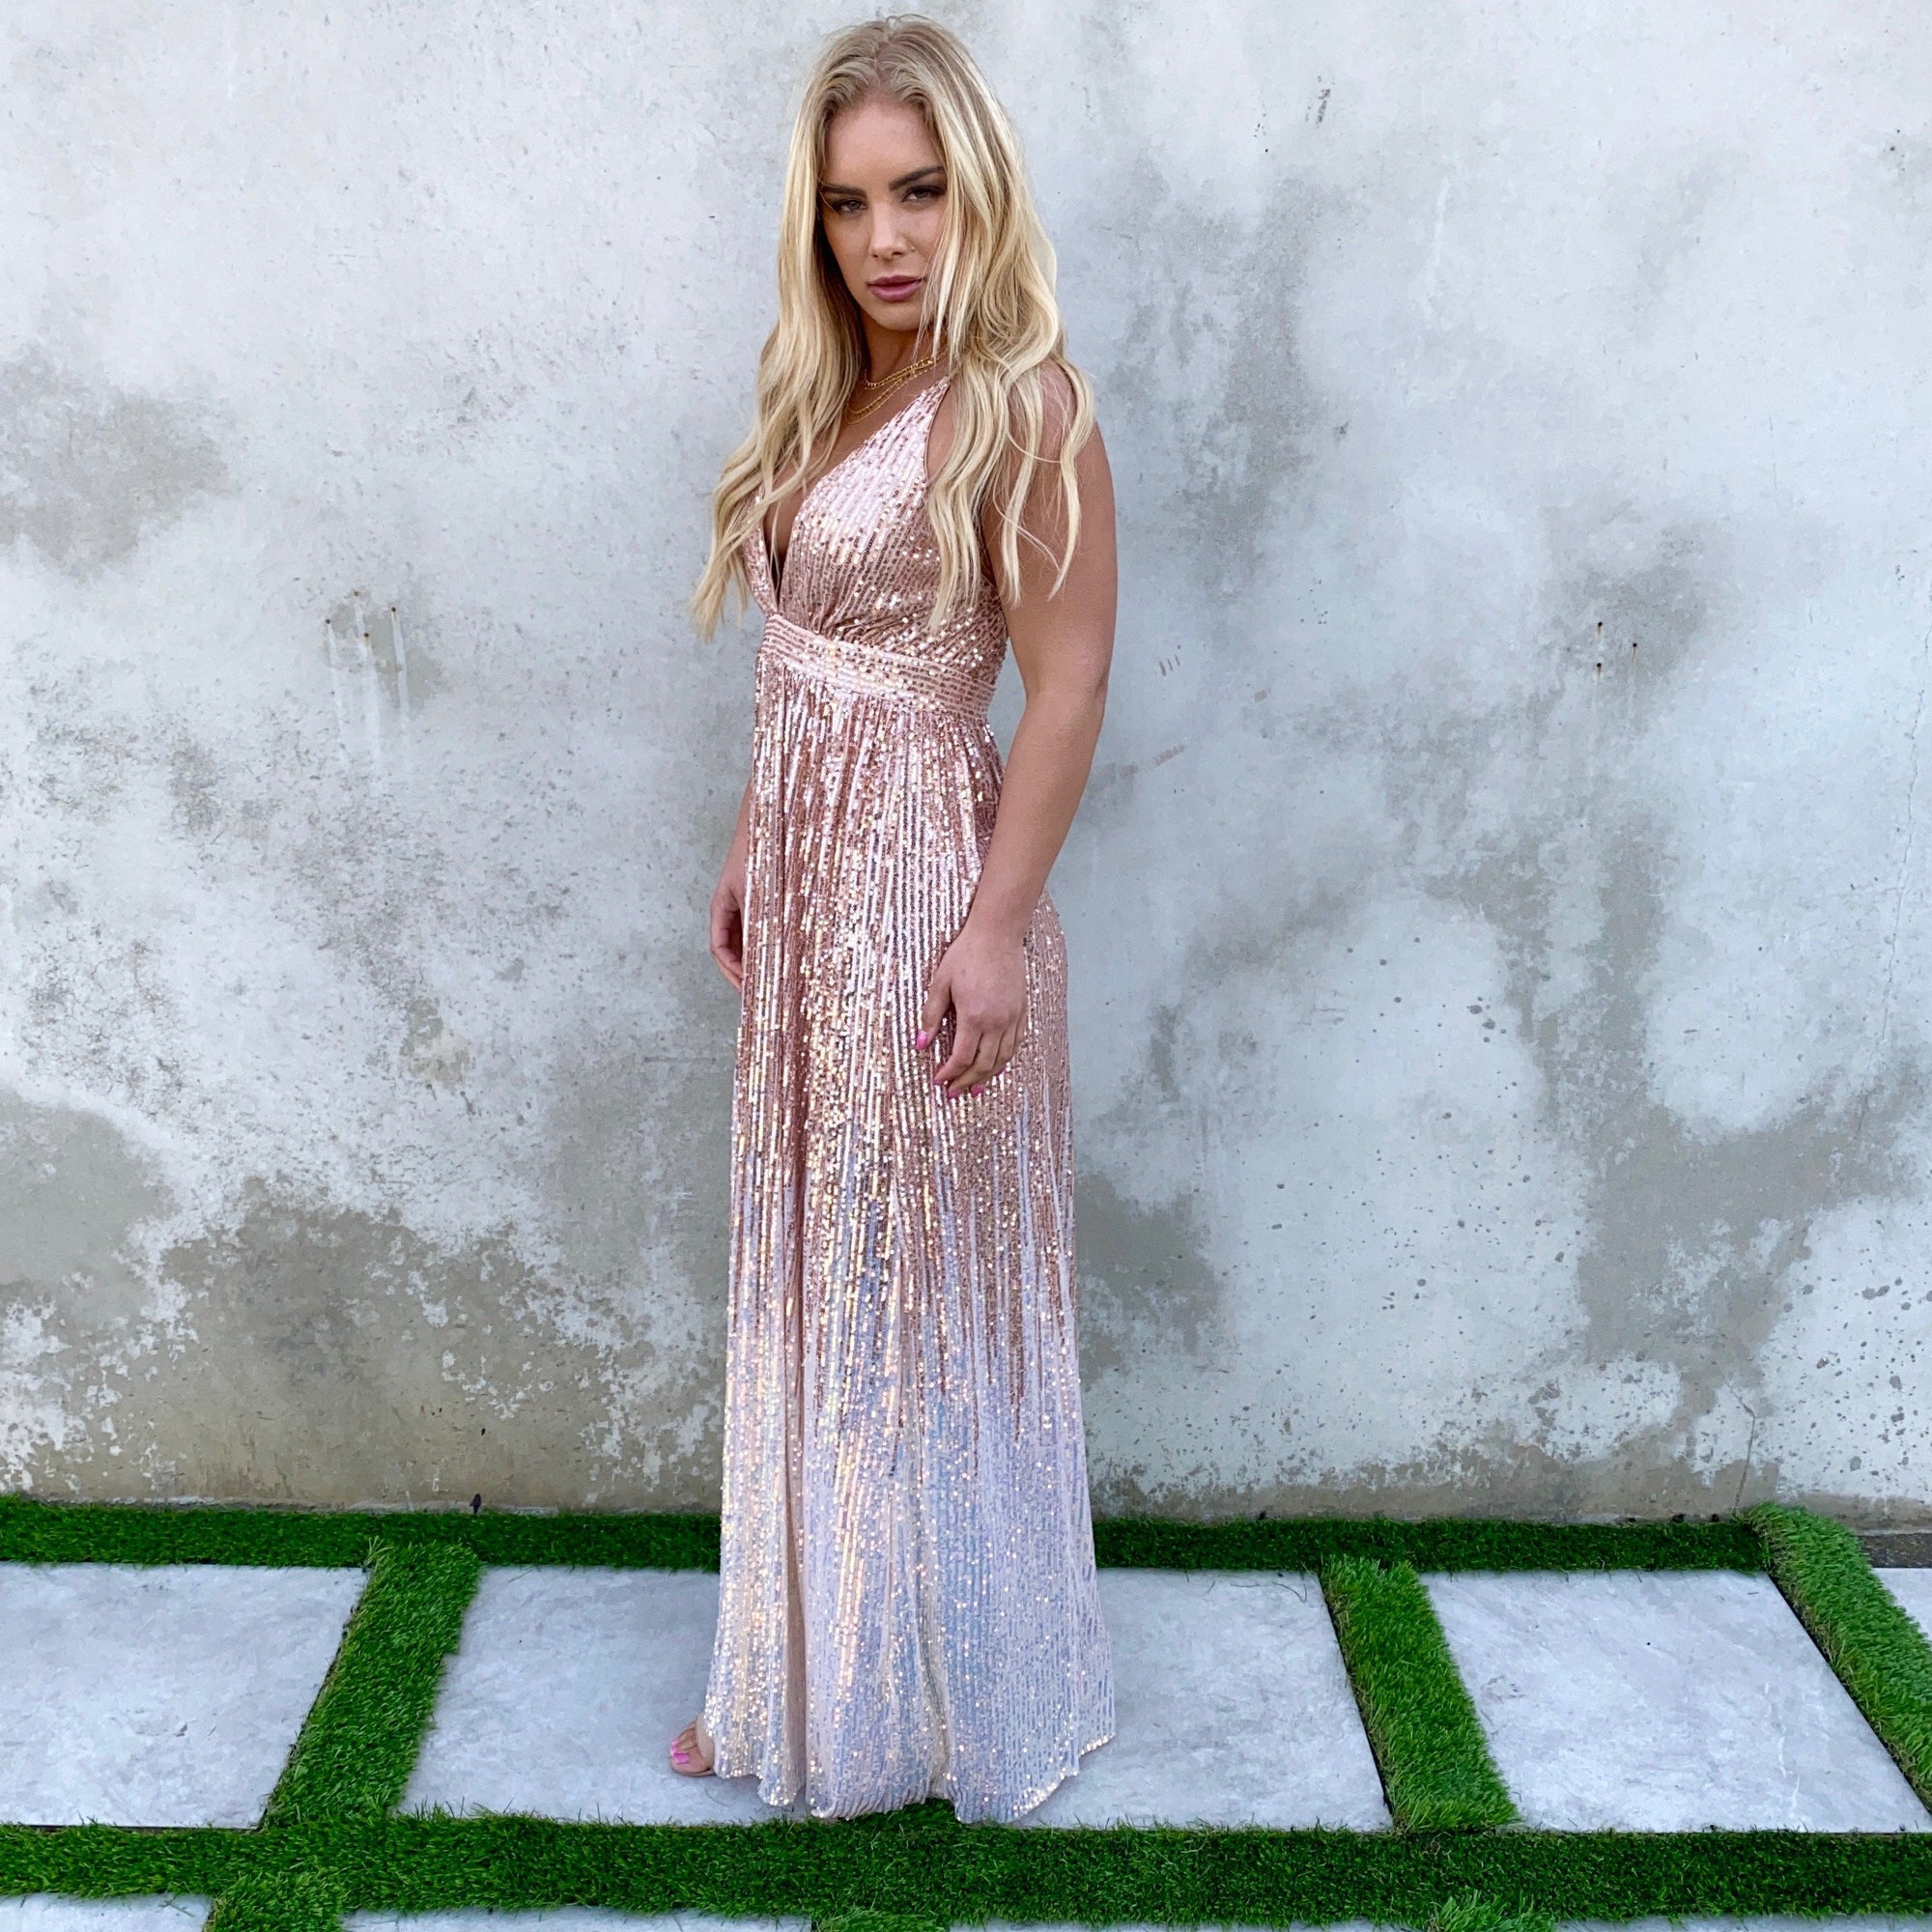 Light Up The Night Rose Gold Ombre Sequin Maxi Dress - Dainty Hooligan